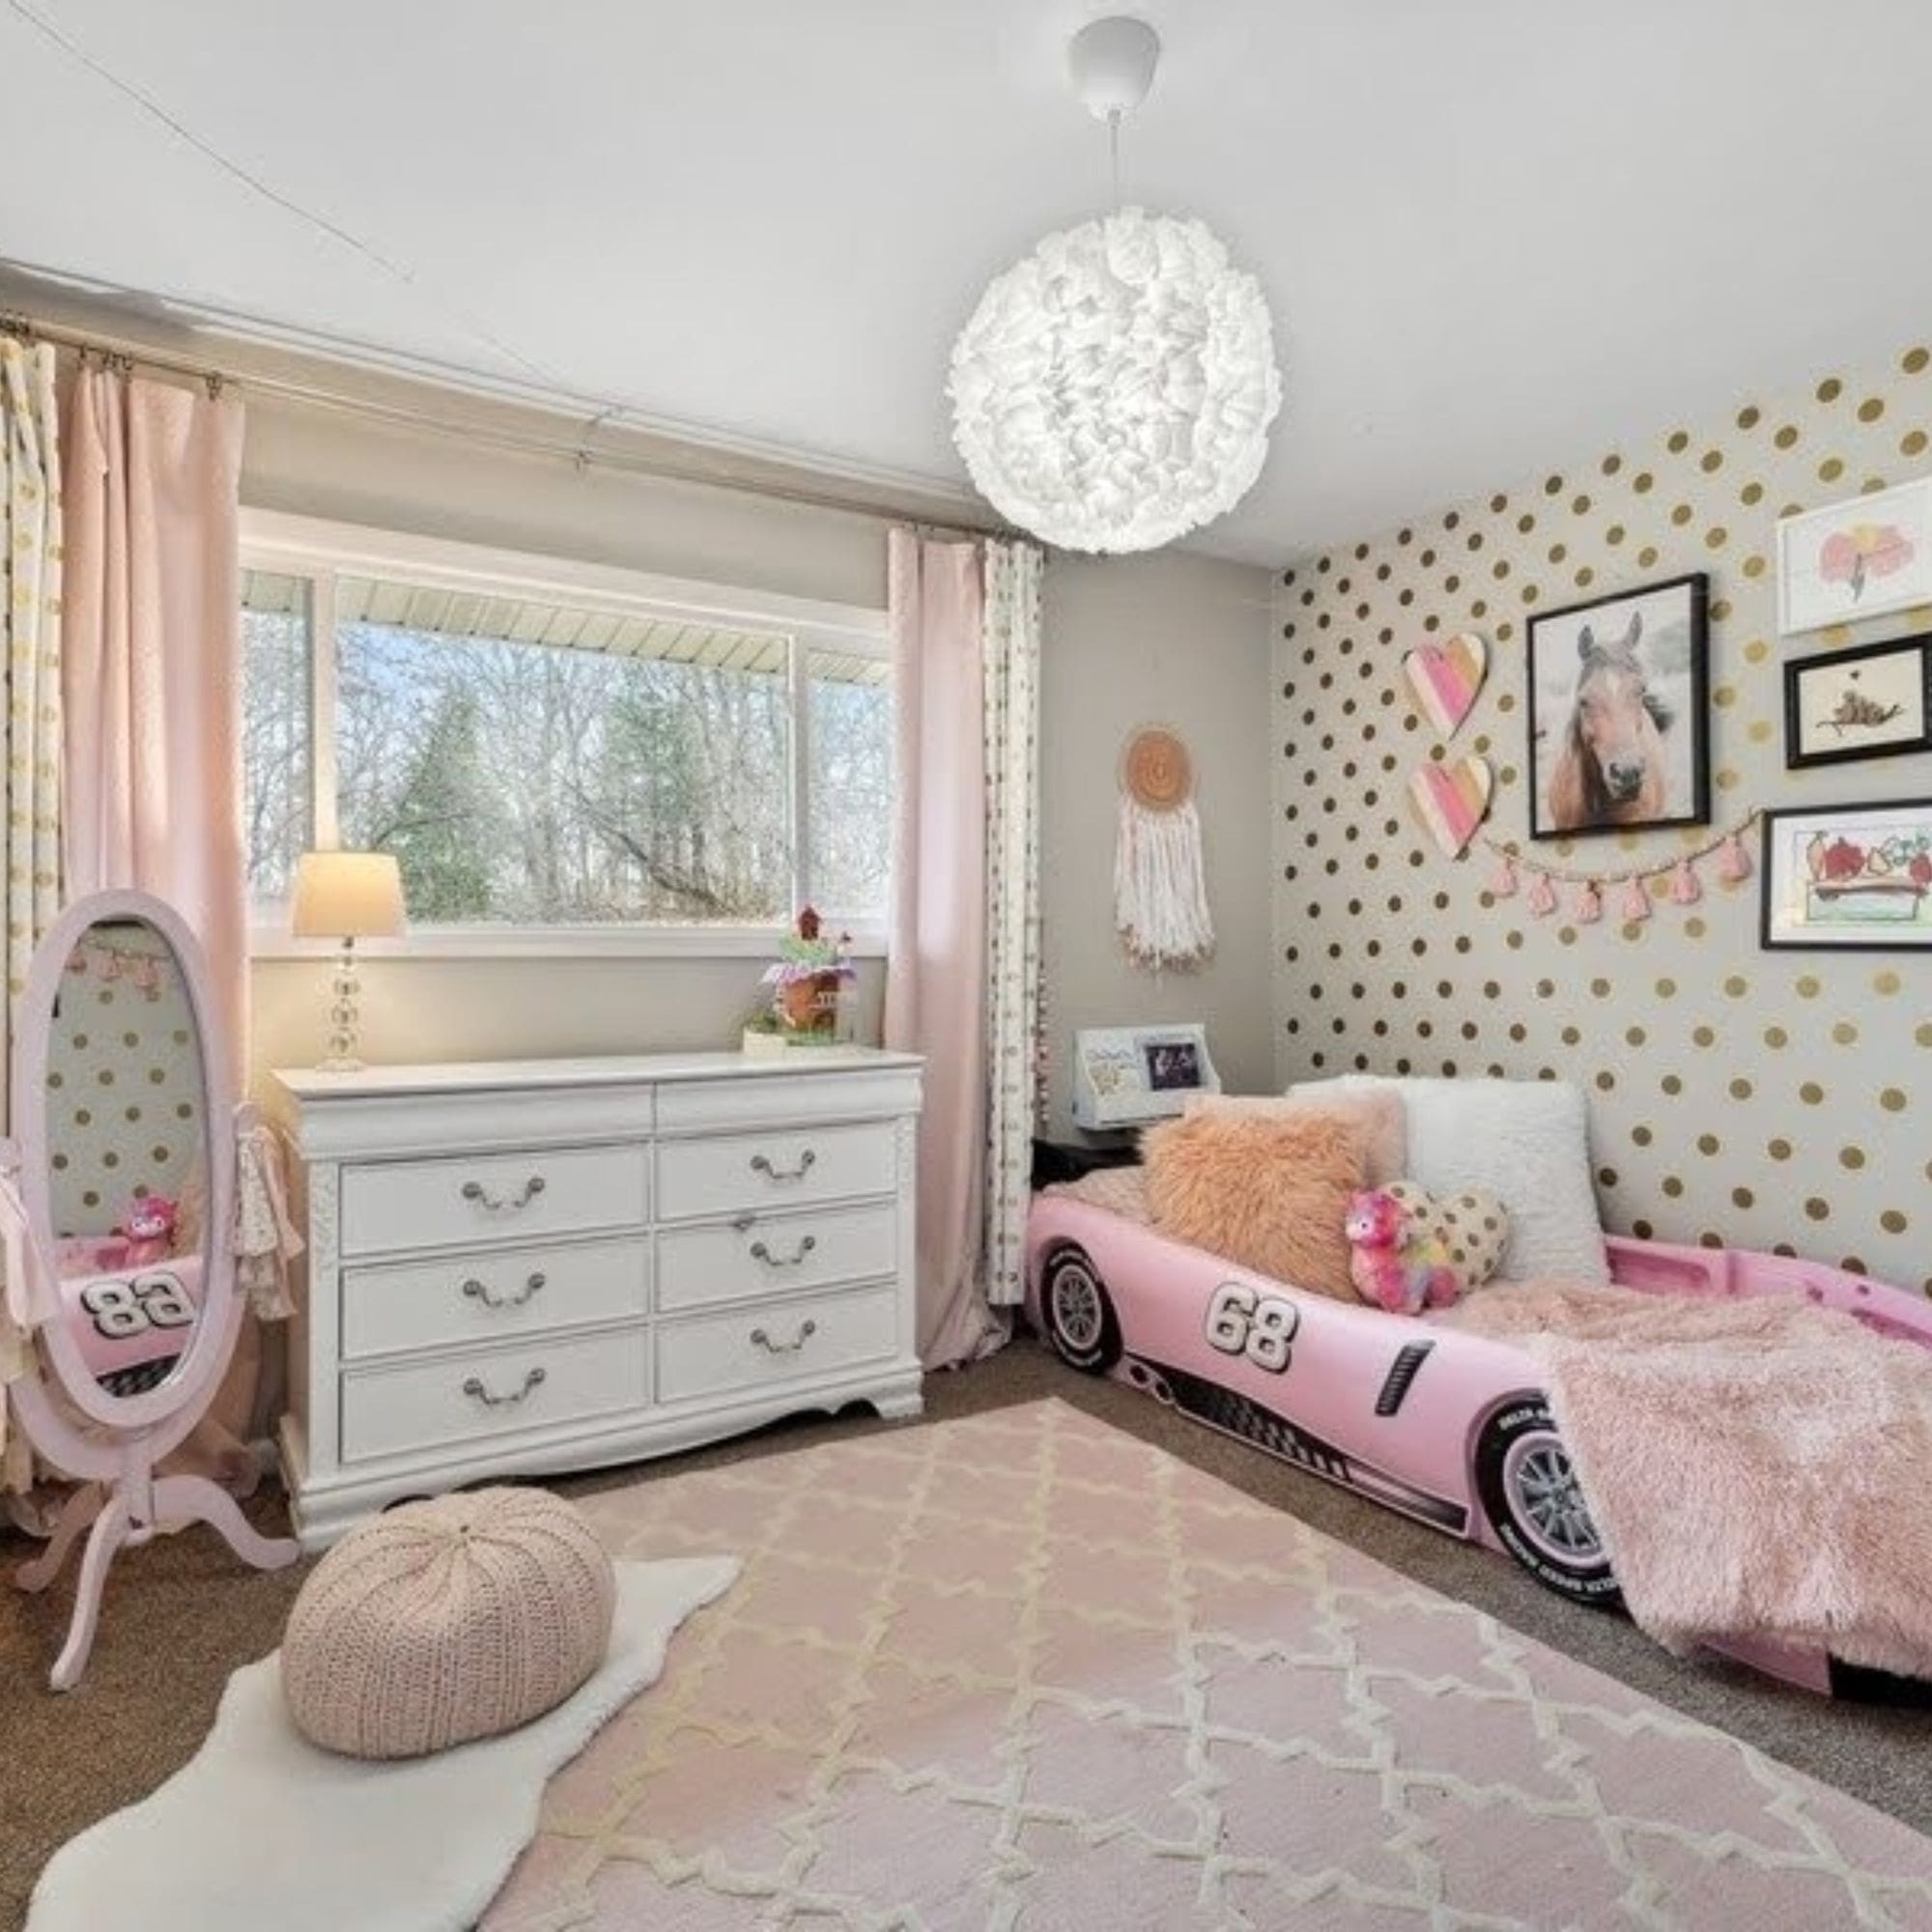 A vibrant pink and gold themed staged girls bedroom featuring a stylish car bed as the centerpiece.